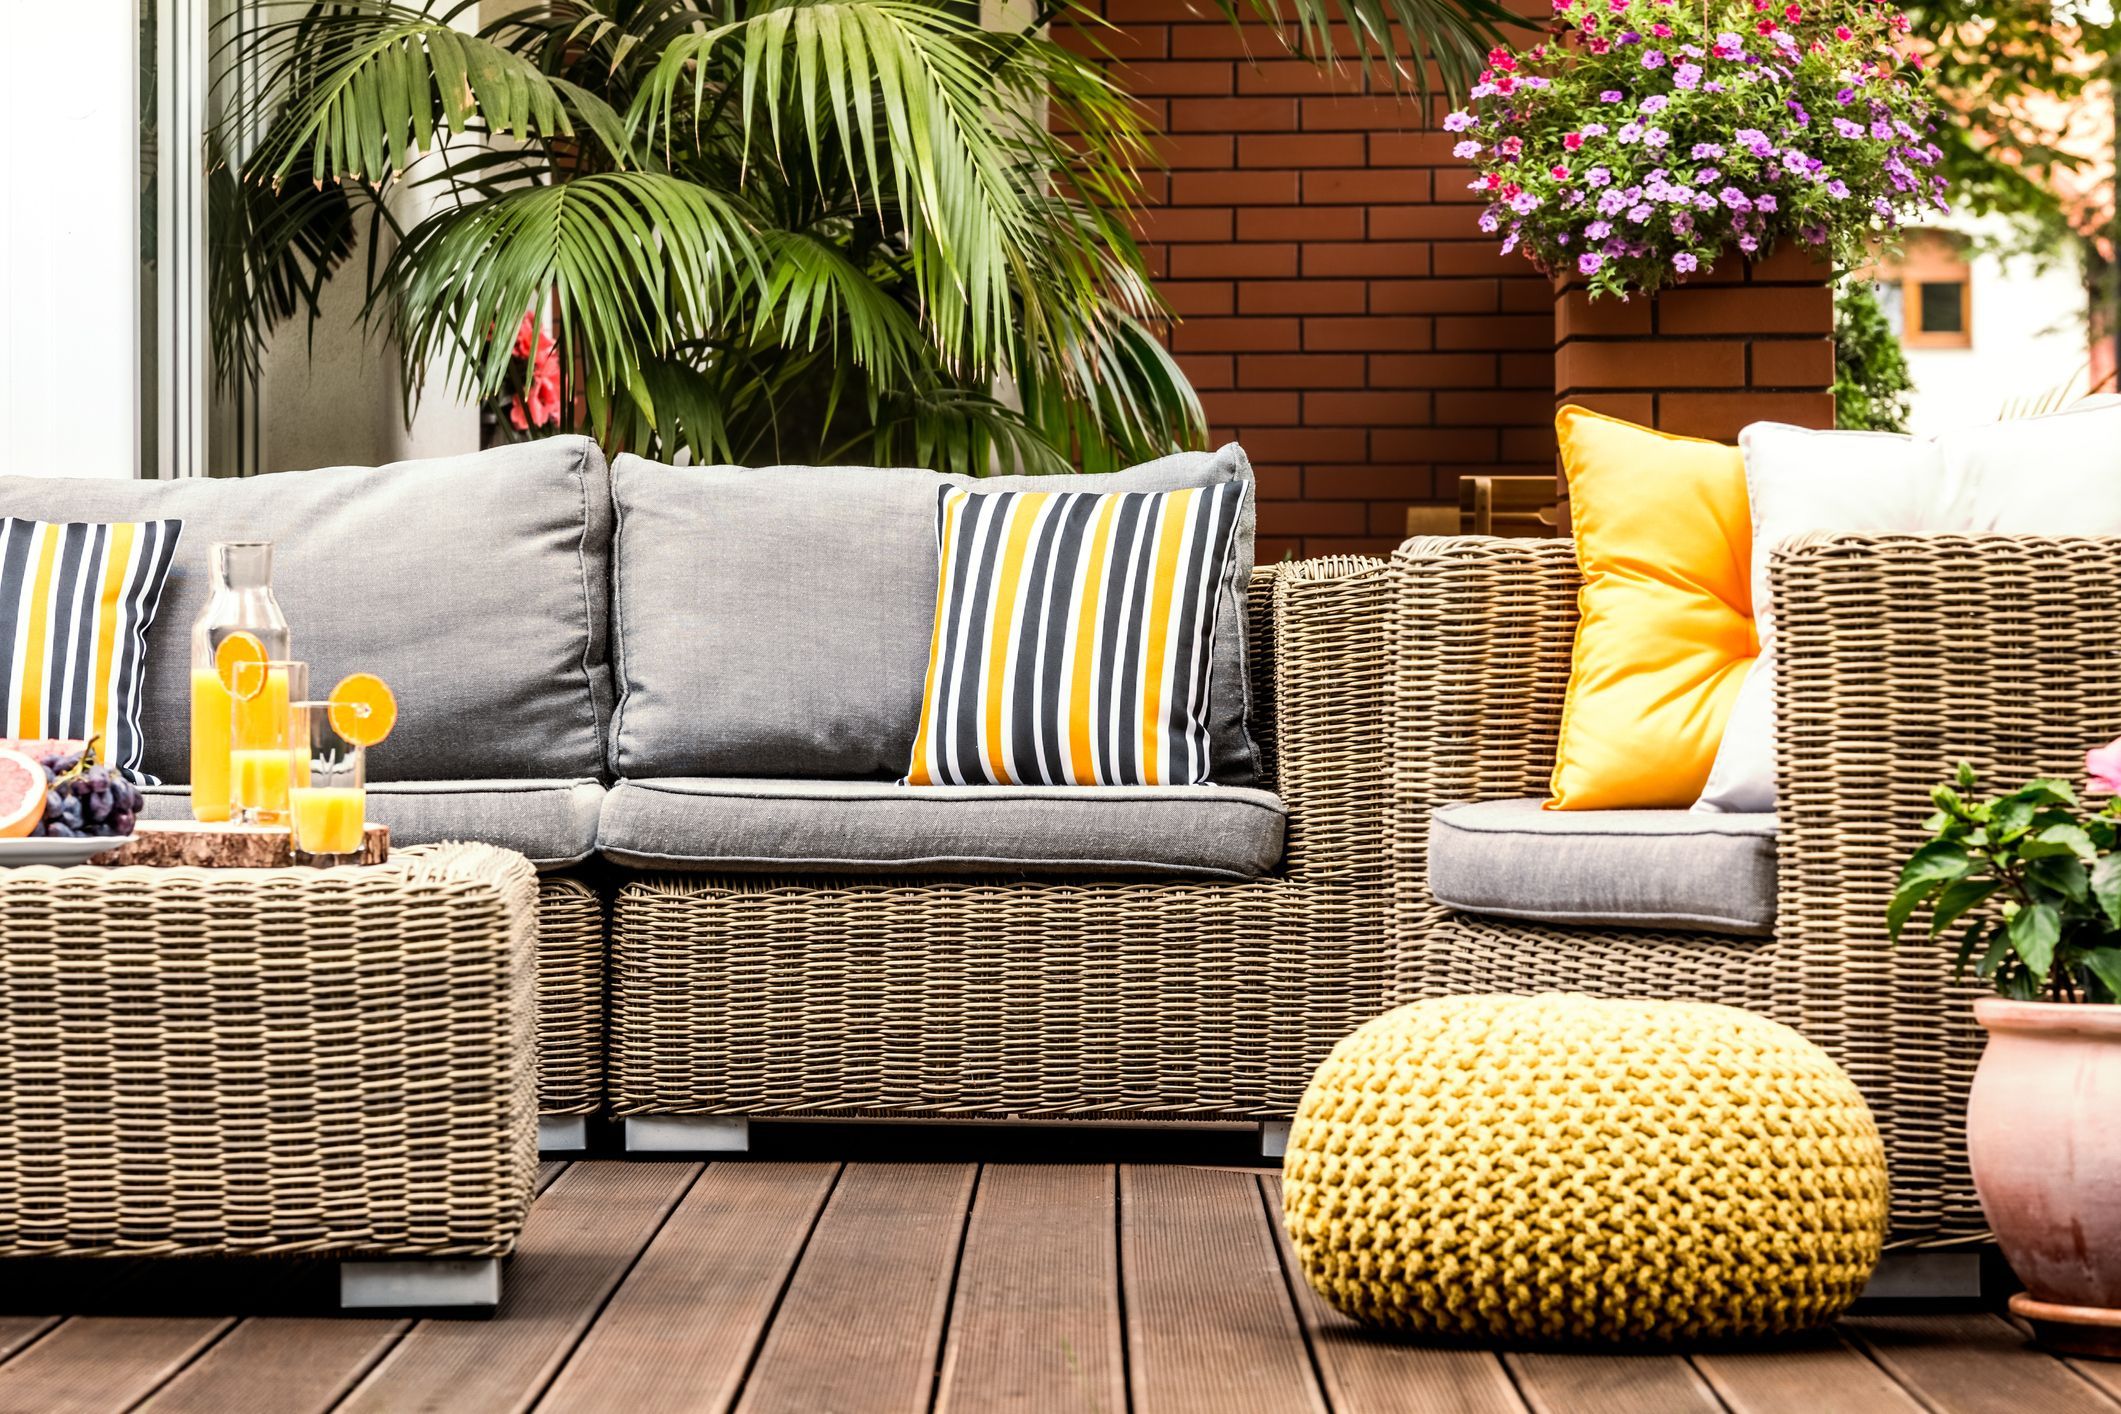 14 Outdoor Cushions To Spruce Up Your Garden Furniture Regarding Balcony And Deck With Soft Cushions (View 6 of 15)